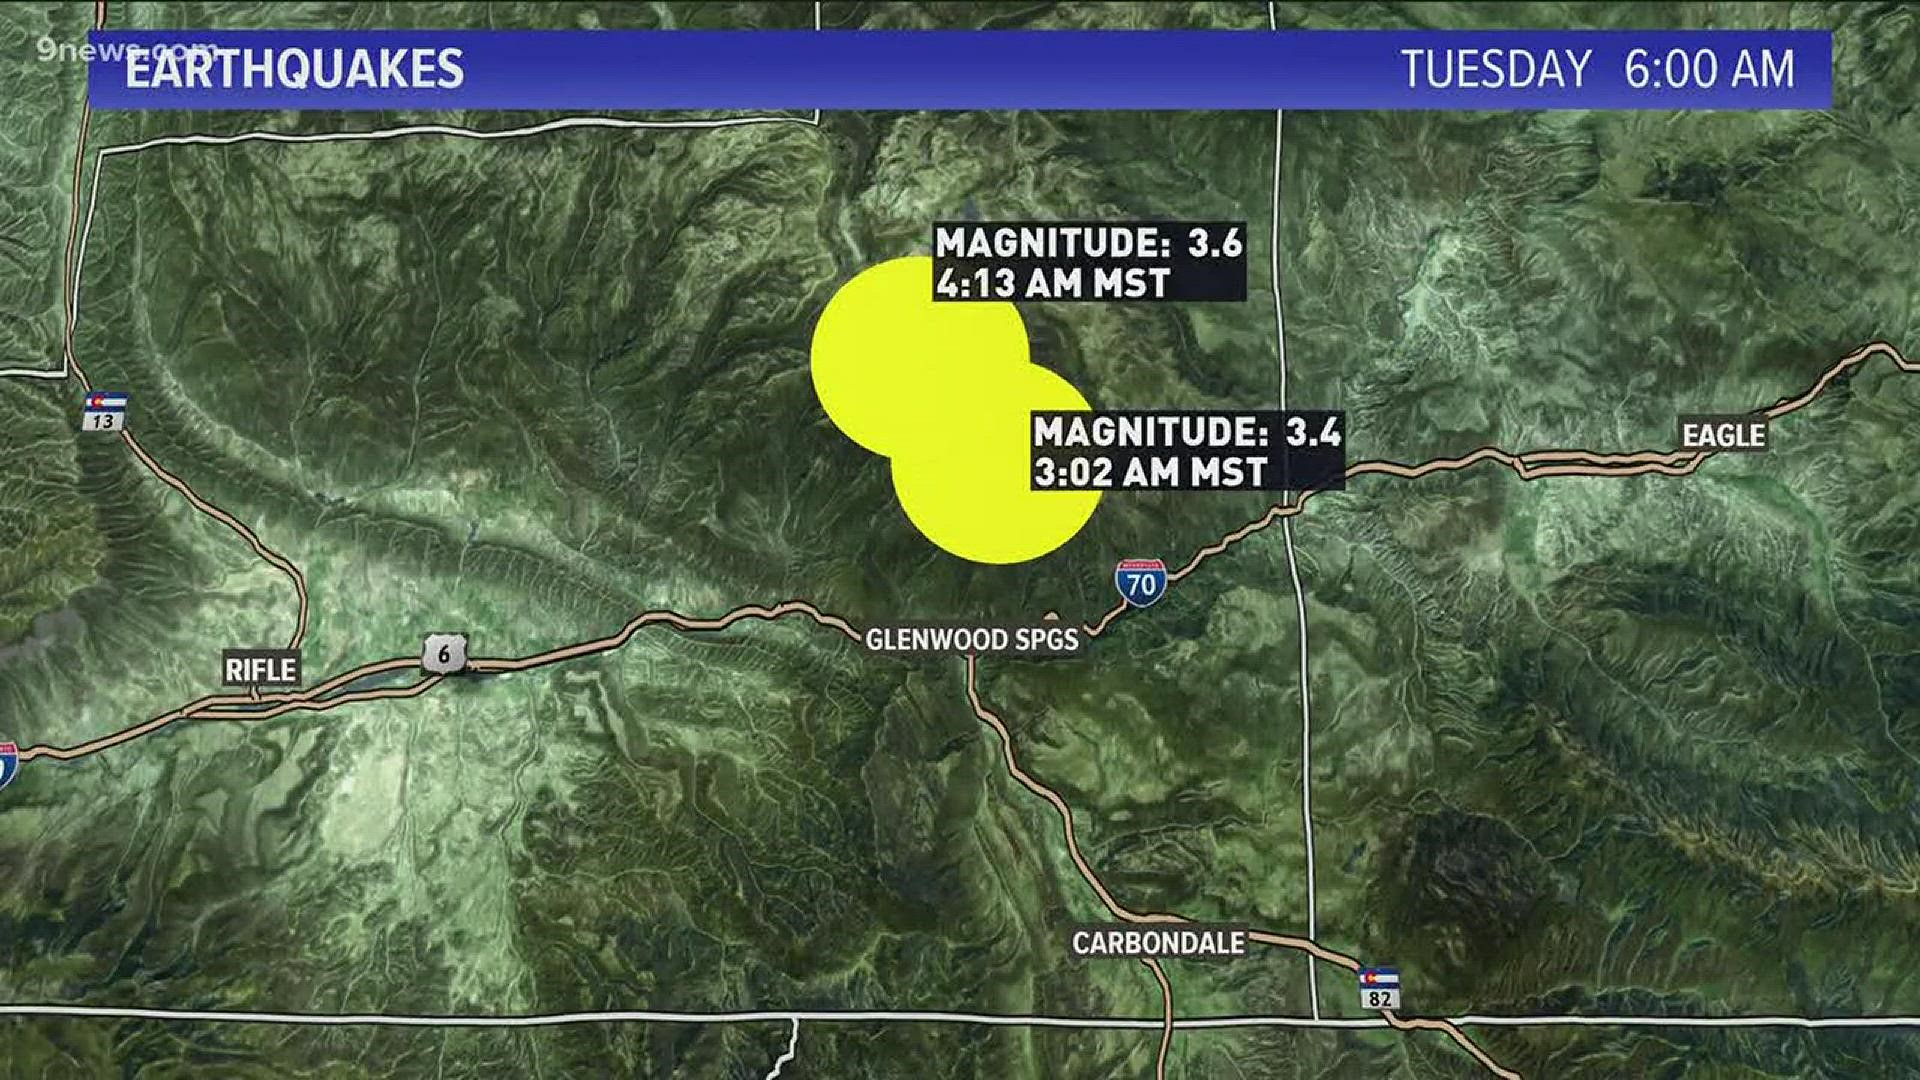 Residents in the Glenwood Springs area woke up early Tuesday morning to some shaking. The USGS confirms there were two earthquakes that hit about with an hour of one another.